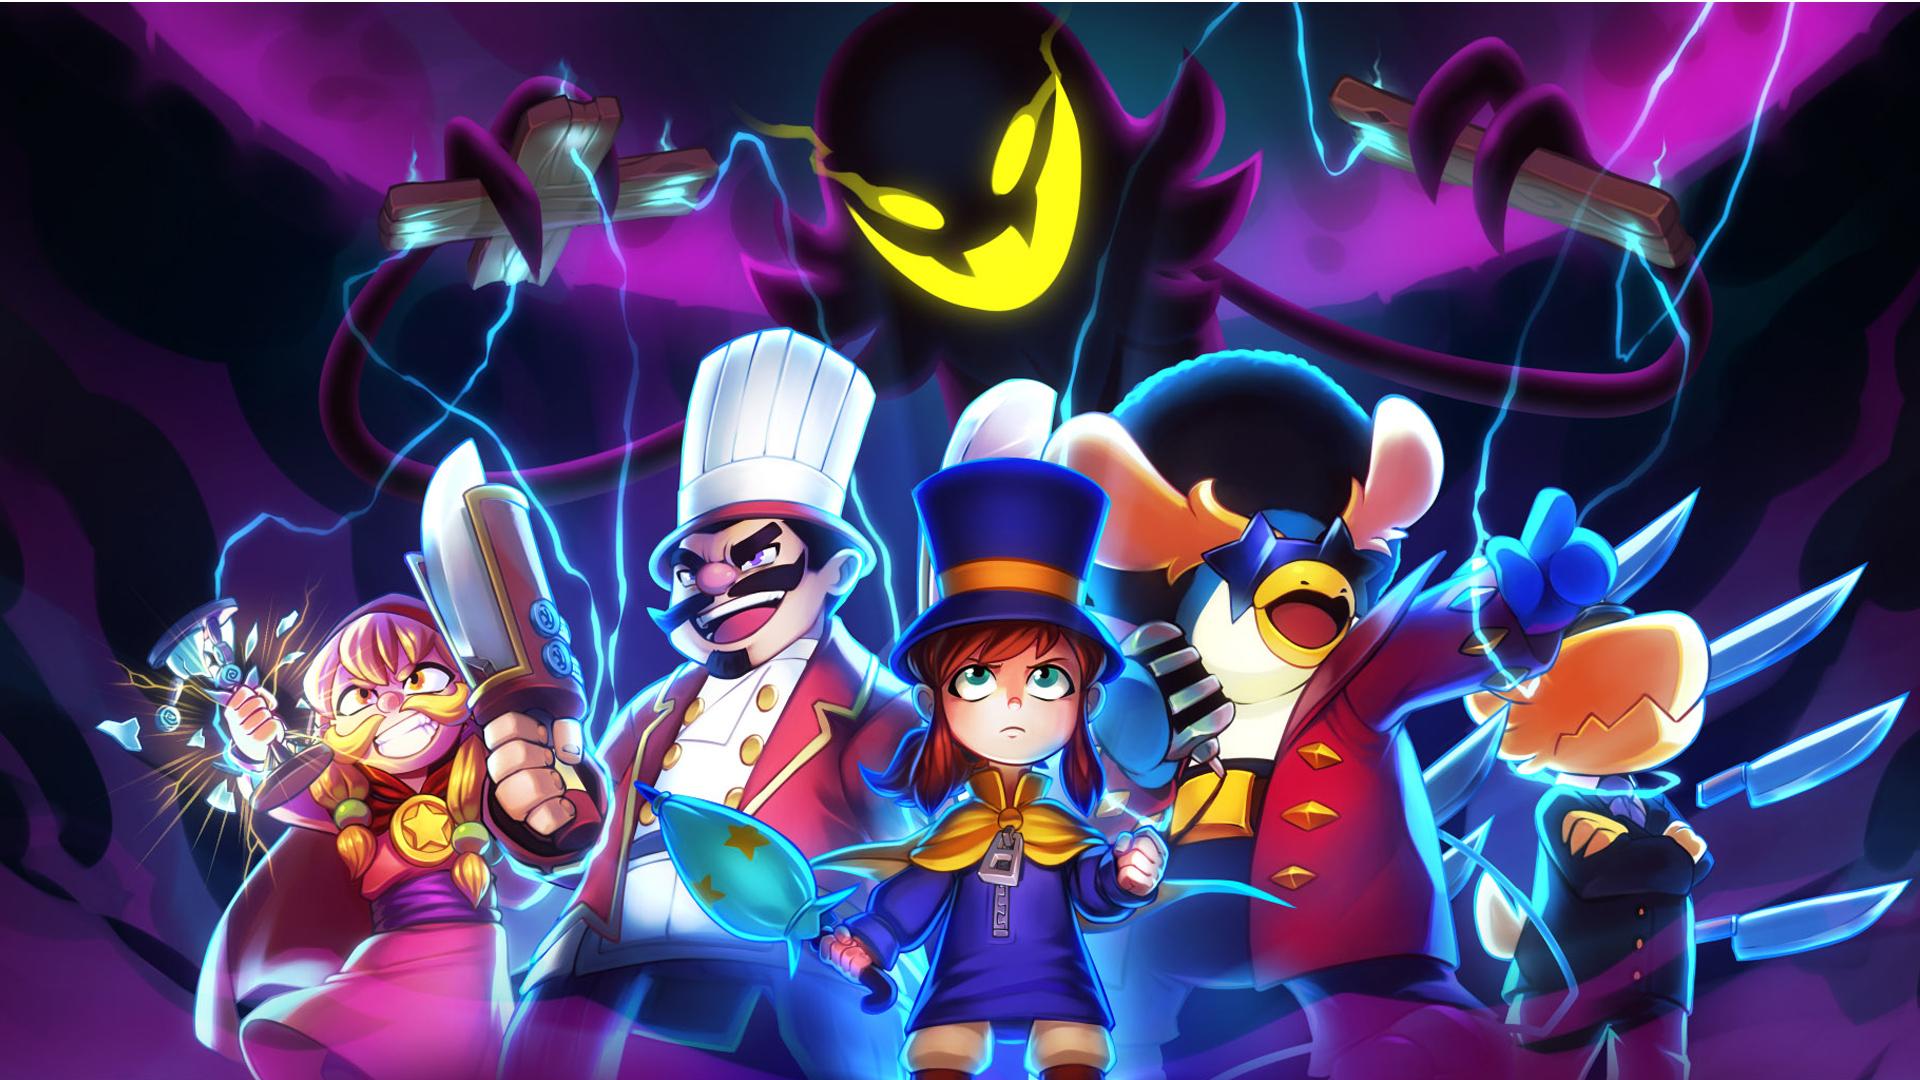 Game's cast. Wallpaper from A Hat in Time